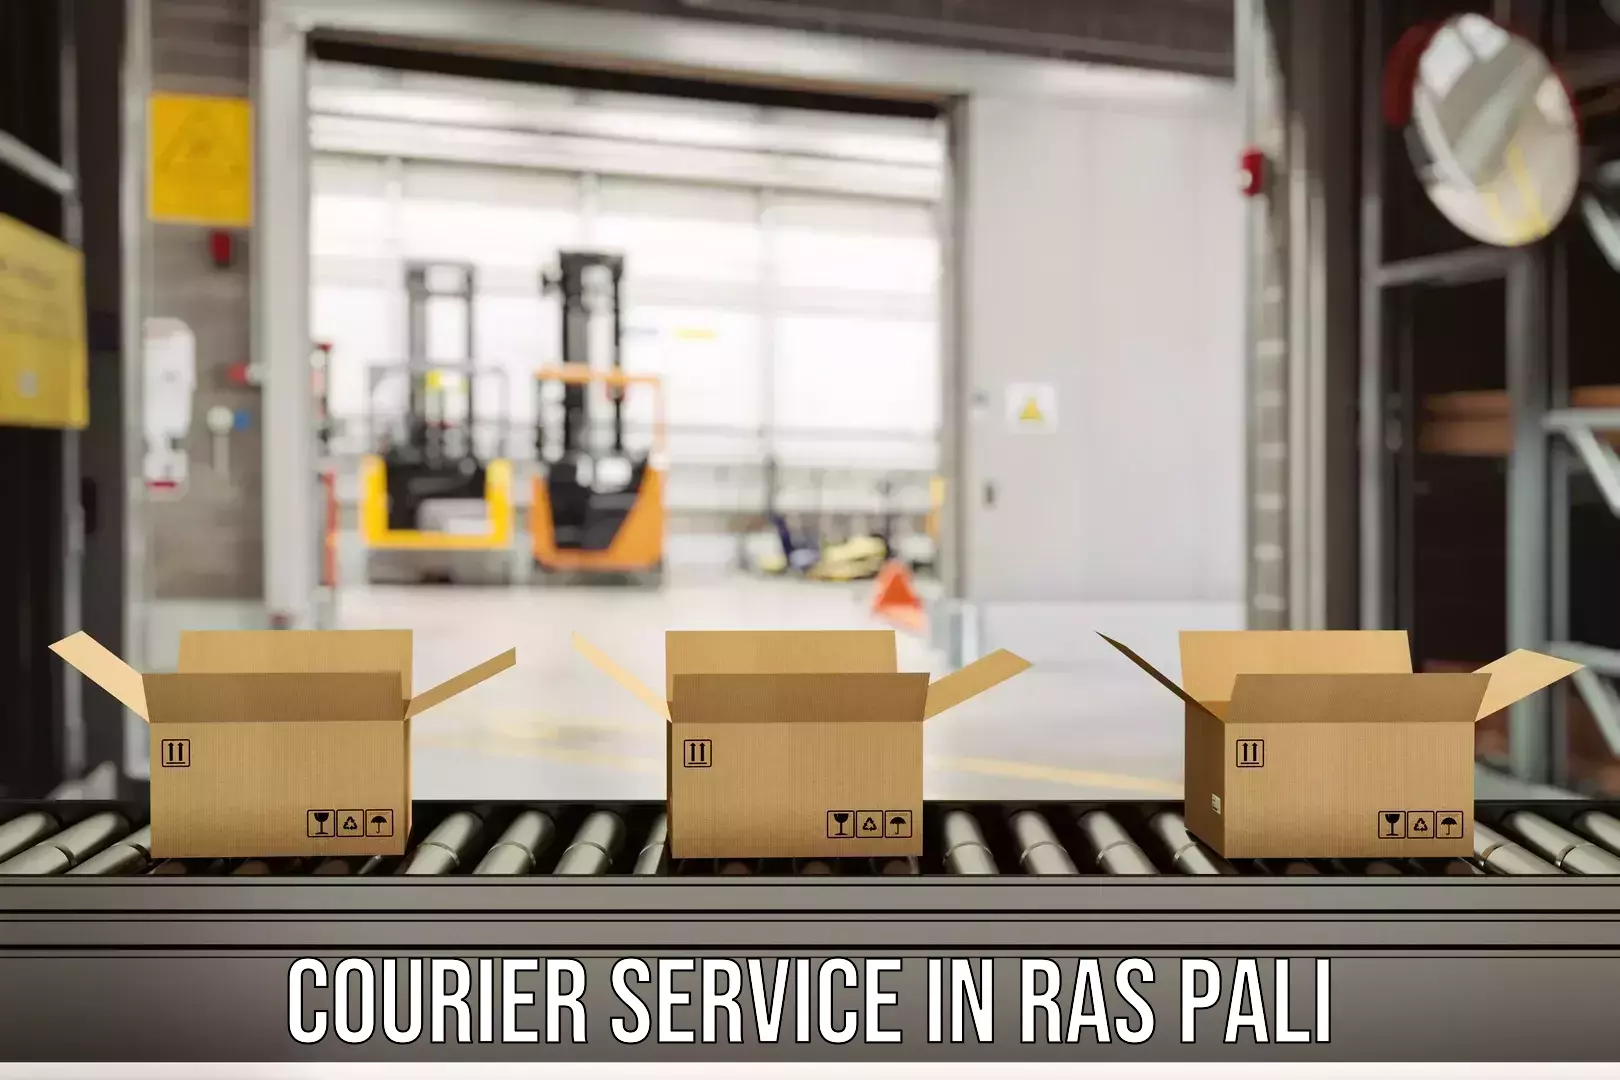 24/7 courier service in Ras Pali